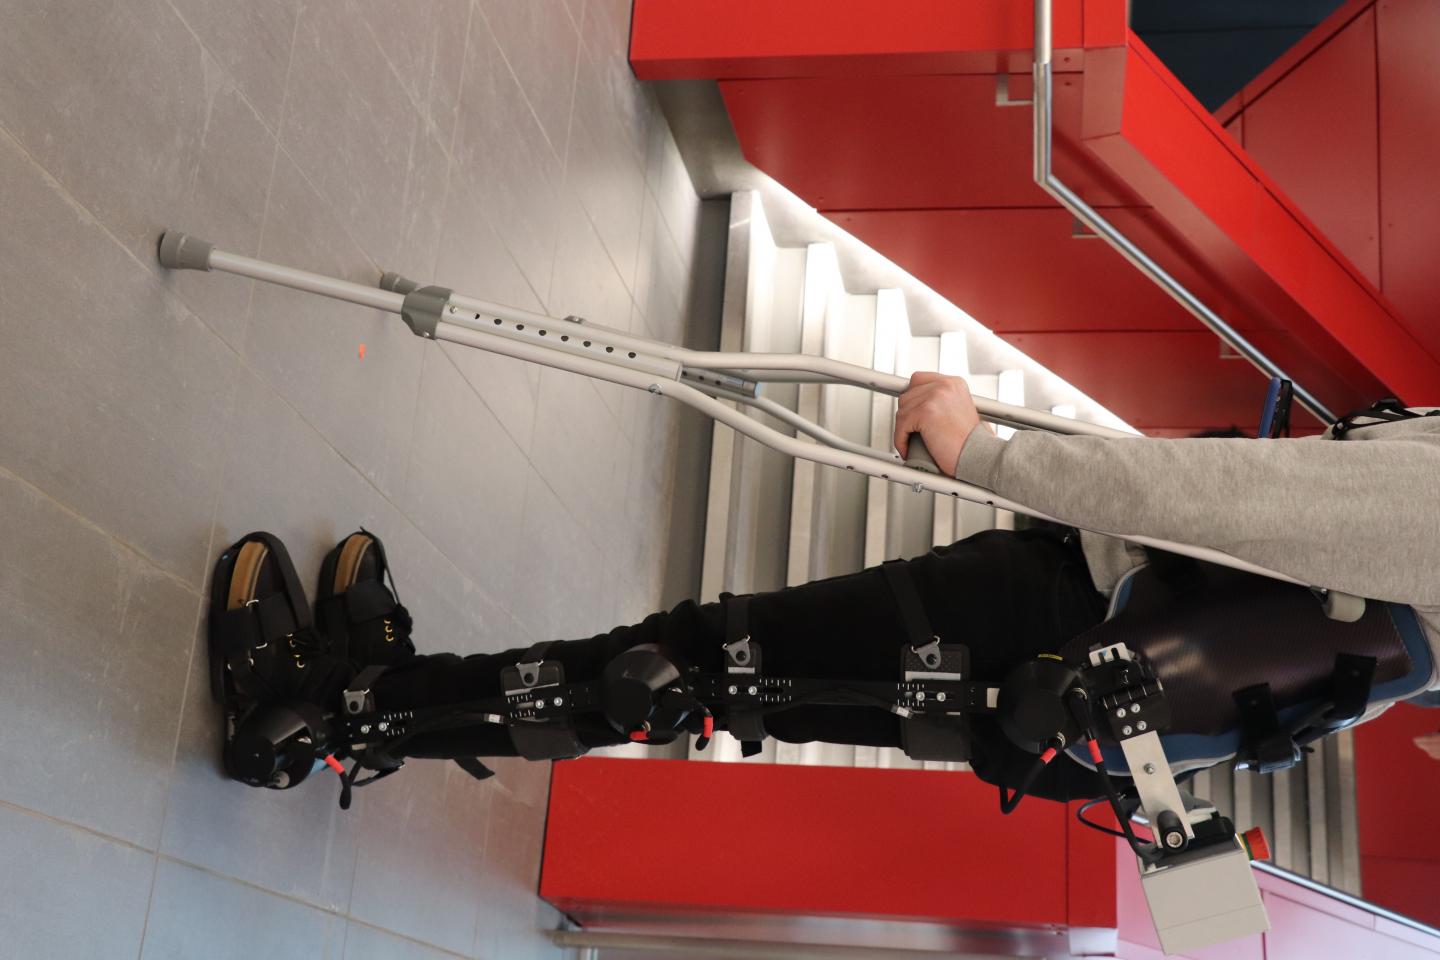 Exoskeleton leg capable of thinking and moving on its own using sophisticated artificial intelligence technology